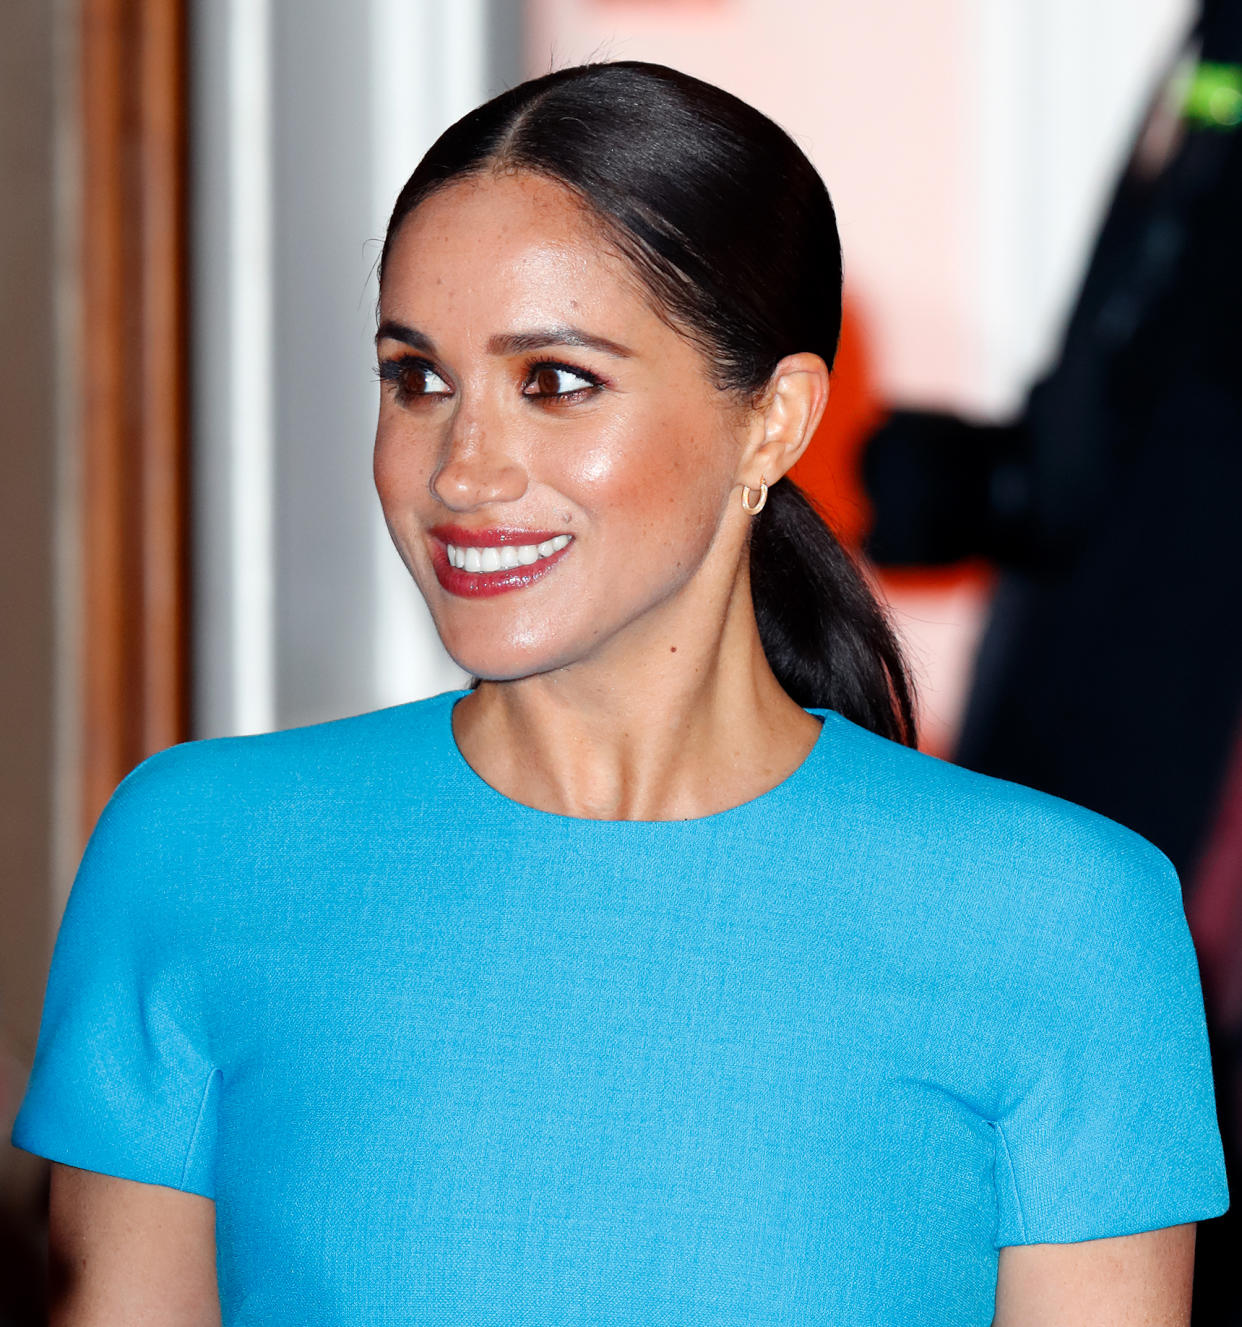 Meghan Markle is among the prominent women celebrating International Women's Day. (Photo: Max Mumby/Indigo/Getty Images)